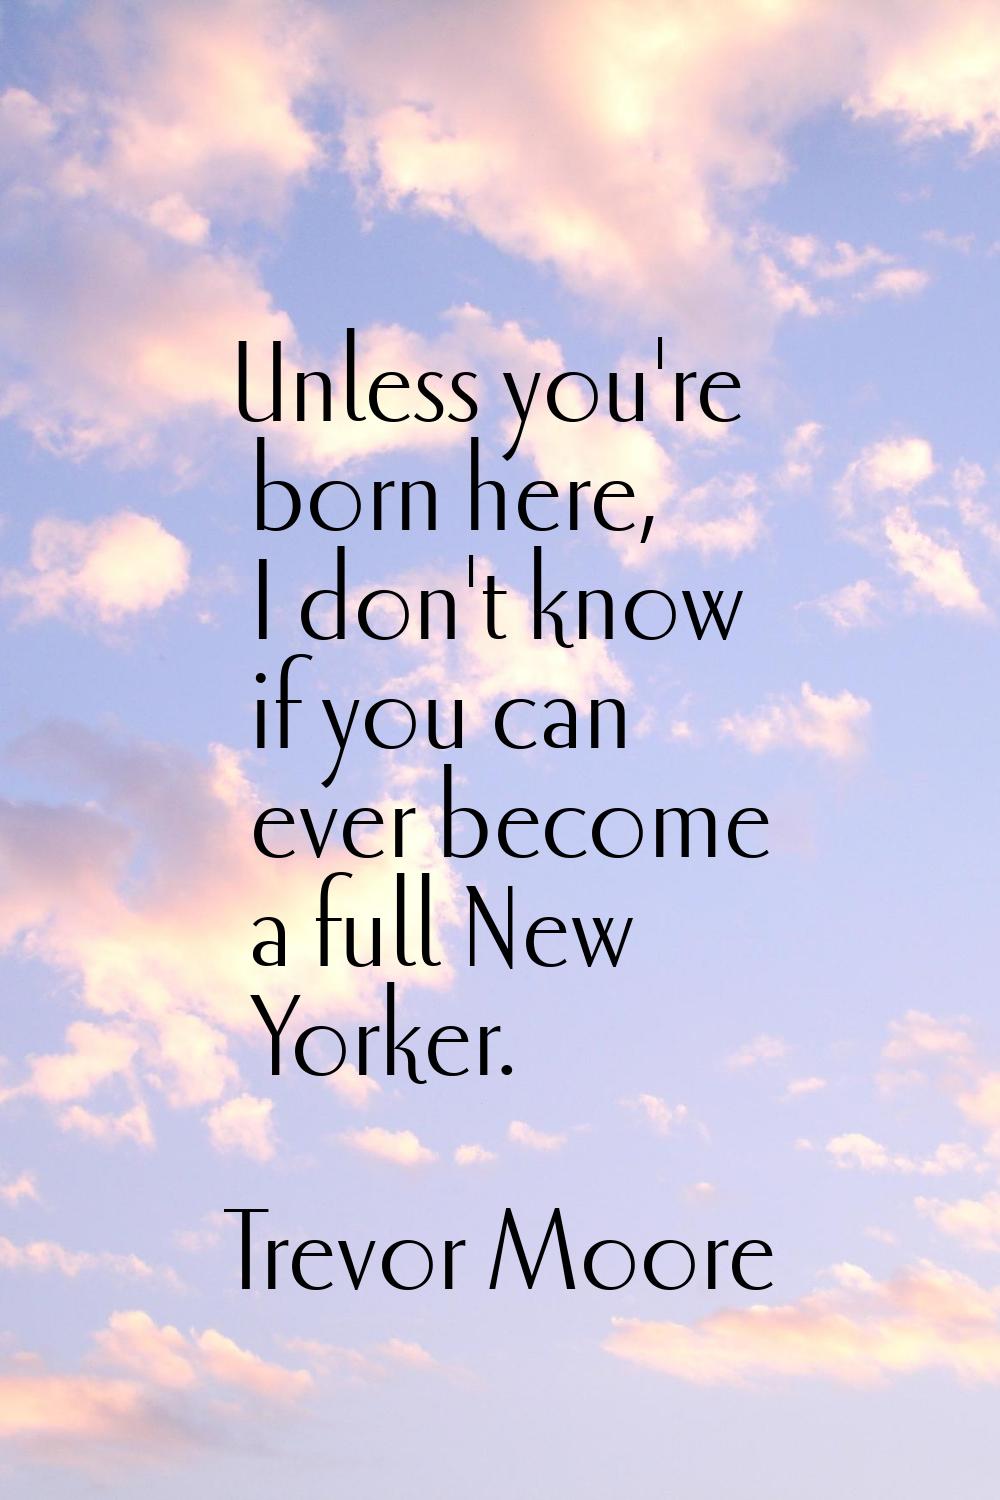 Unless you're born here, I don't know if you can ever become a full New Yorker.